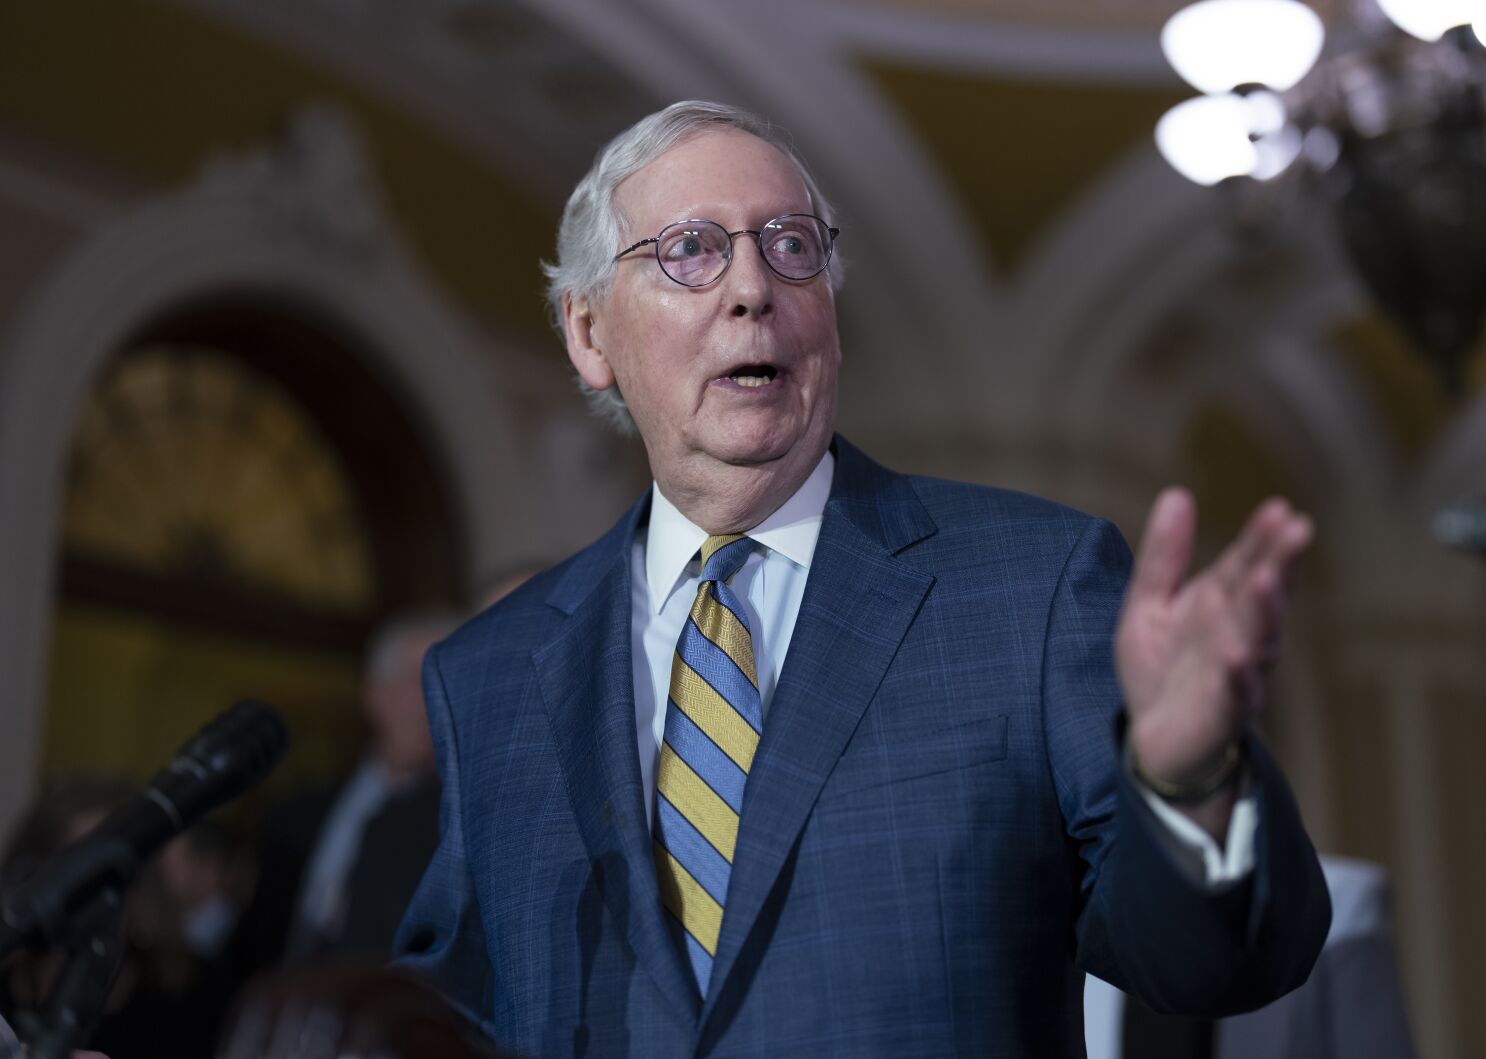 GOP leader Mitch McConnell hospitalized after fall, spokesperson says